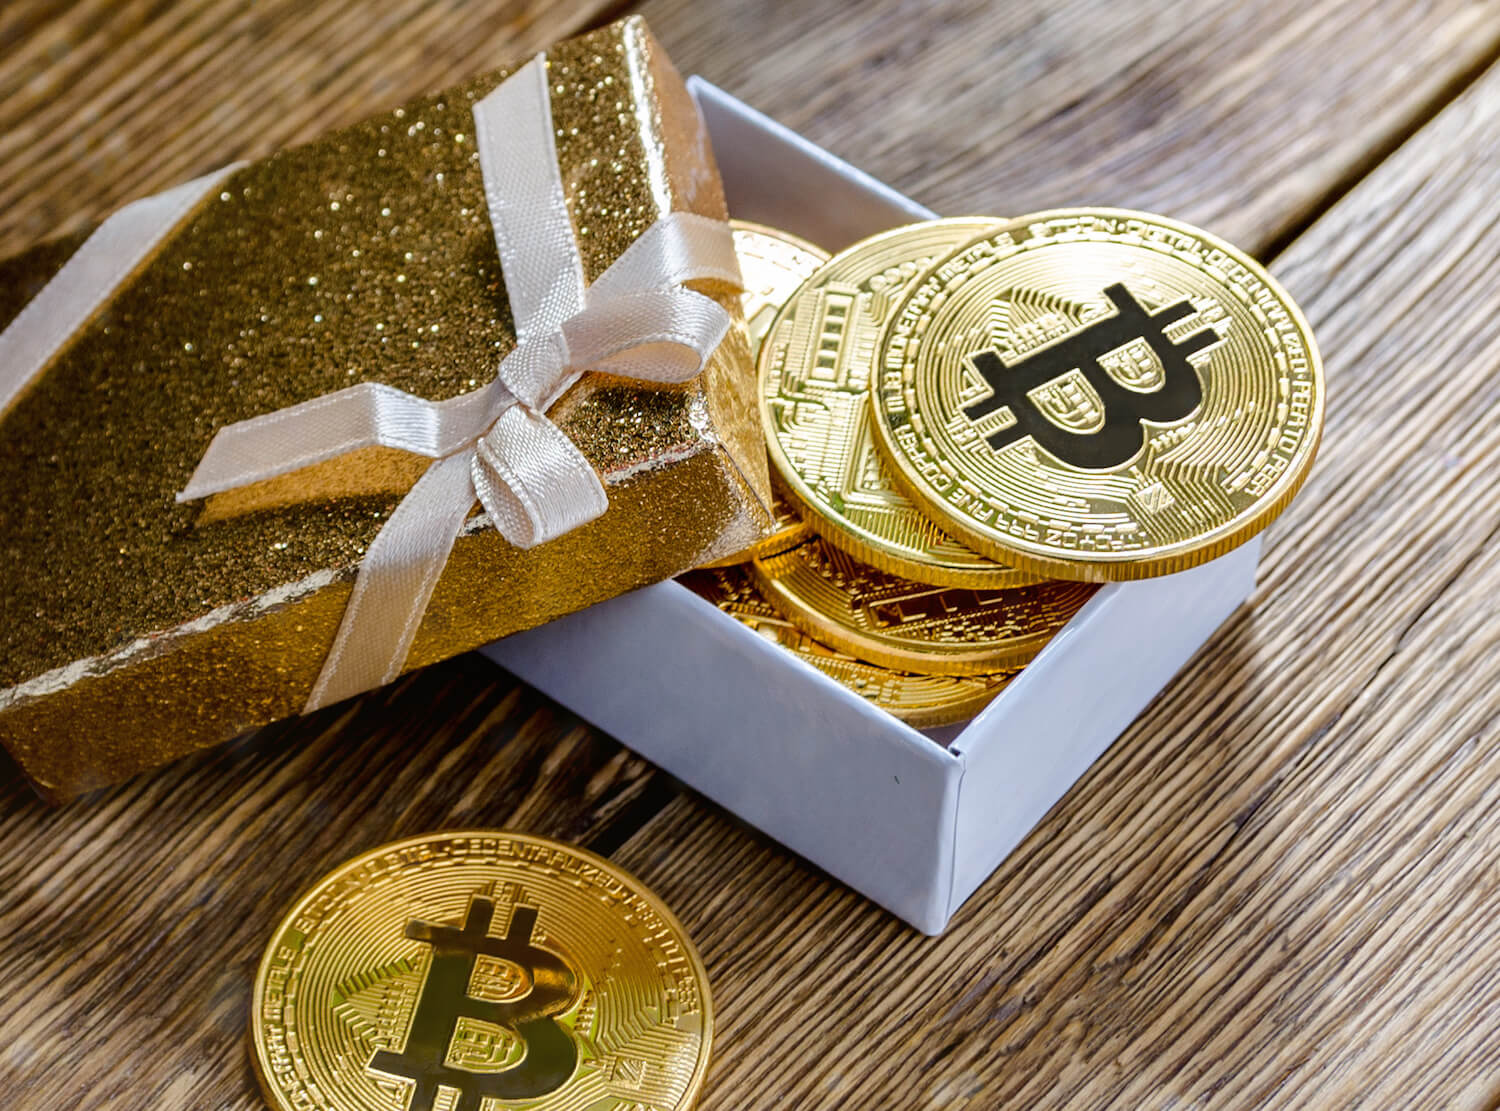 Block will allow Cash App users to send Bitcoin or stock as gifts over the holiday season